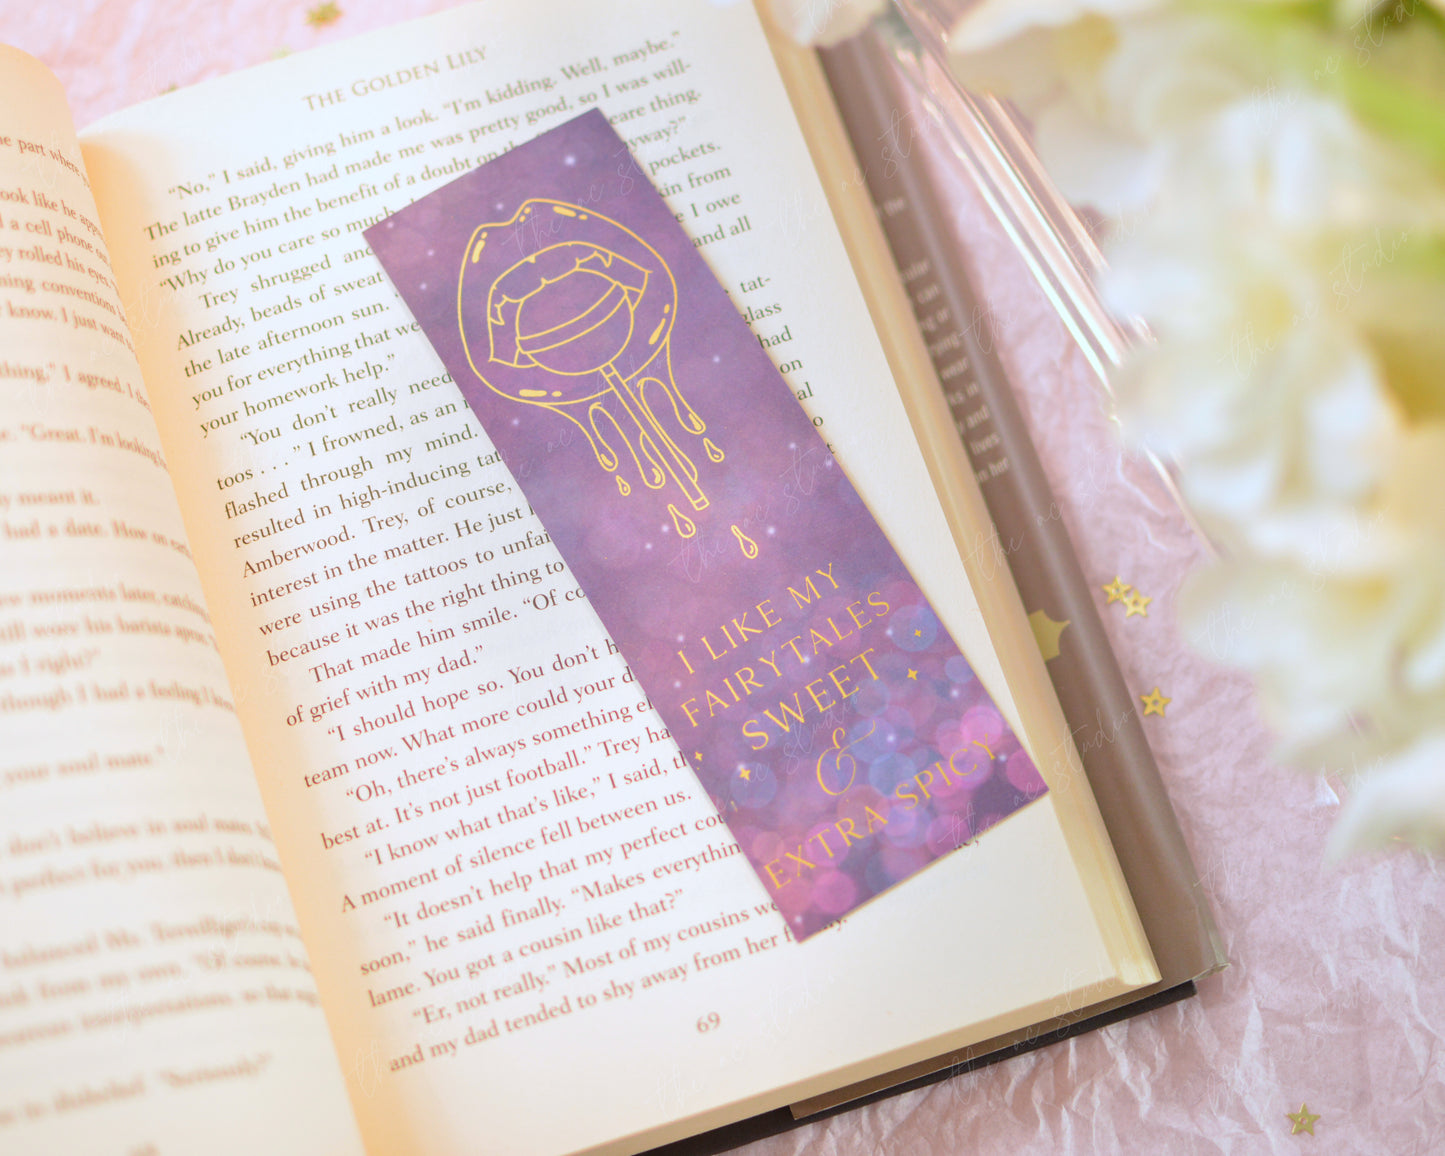 I Like My Fairytales Sweet and Extra Spicy Bookmark